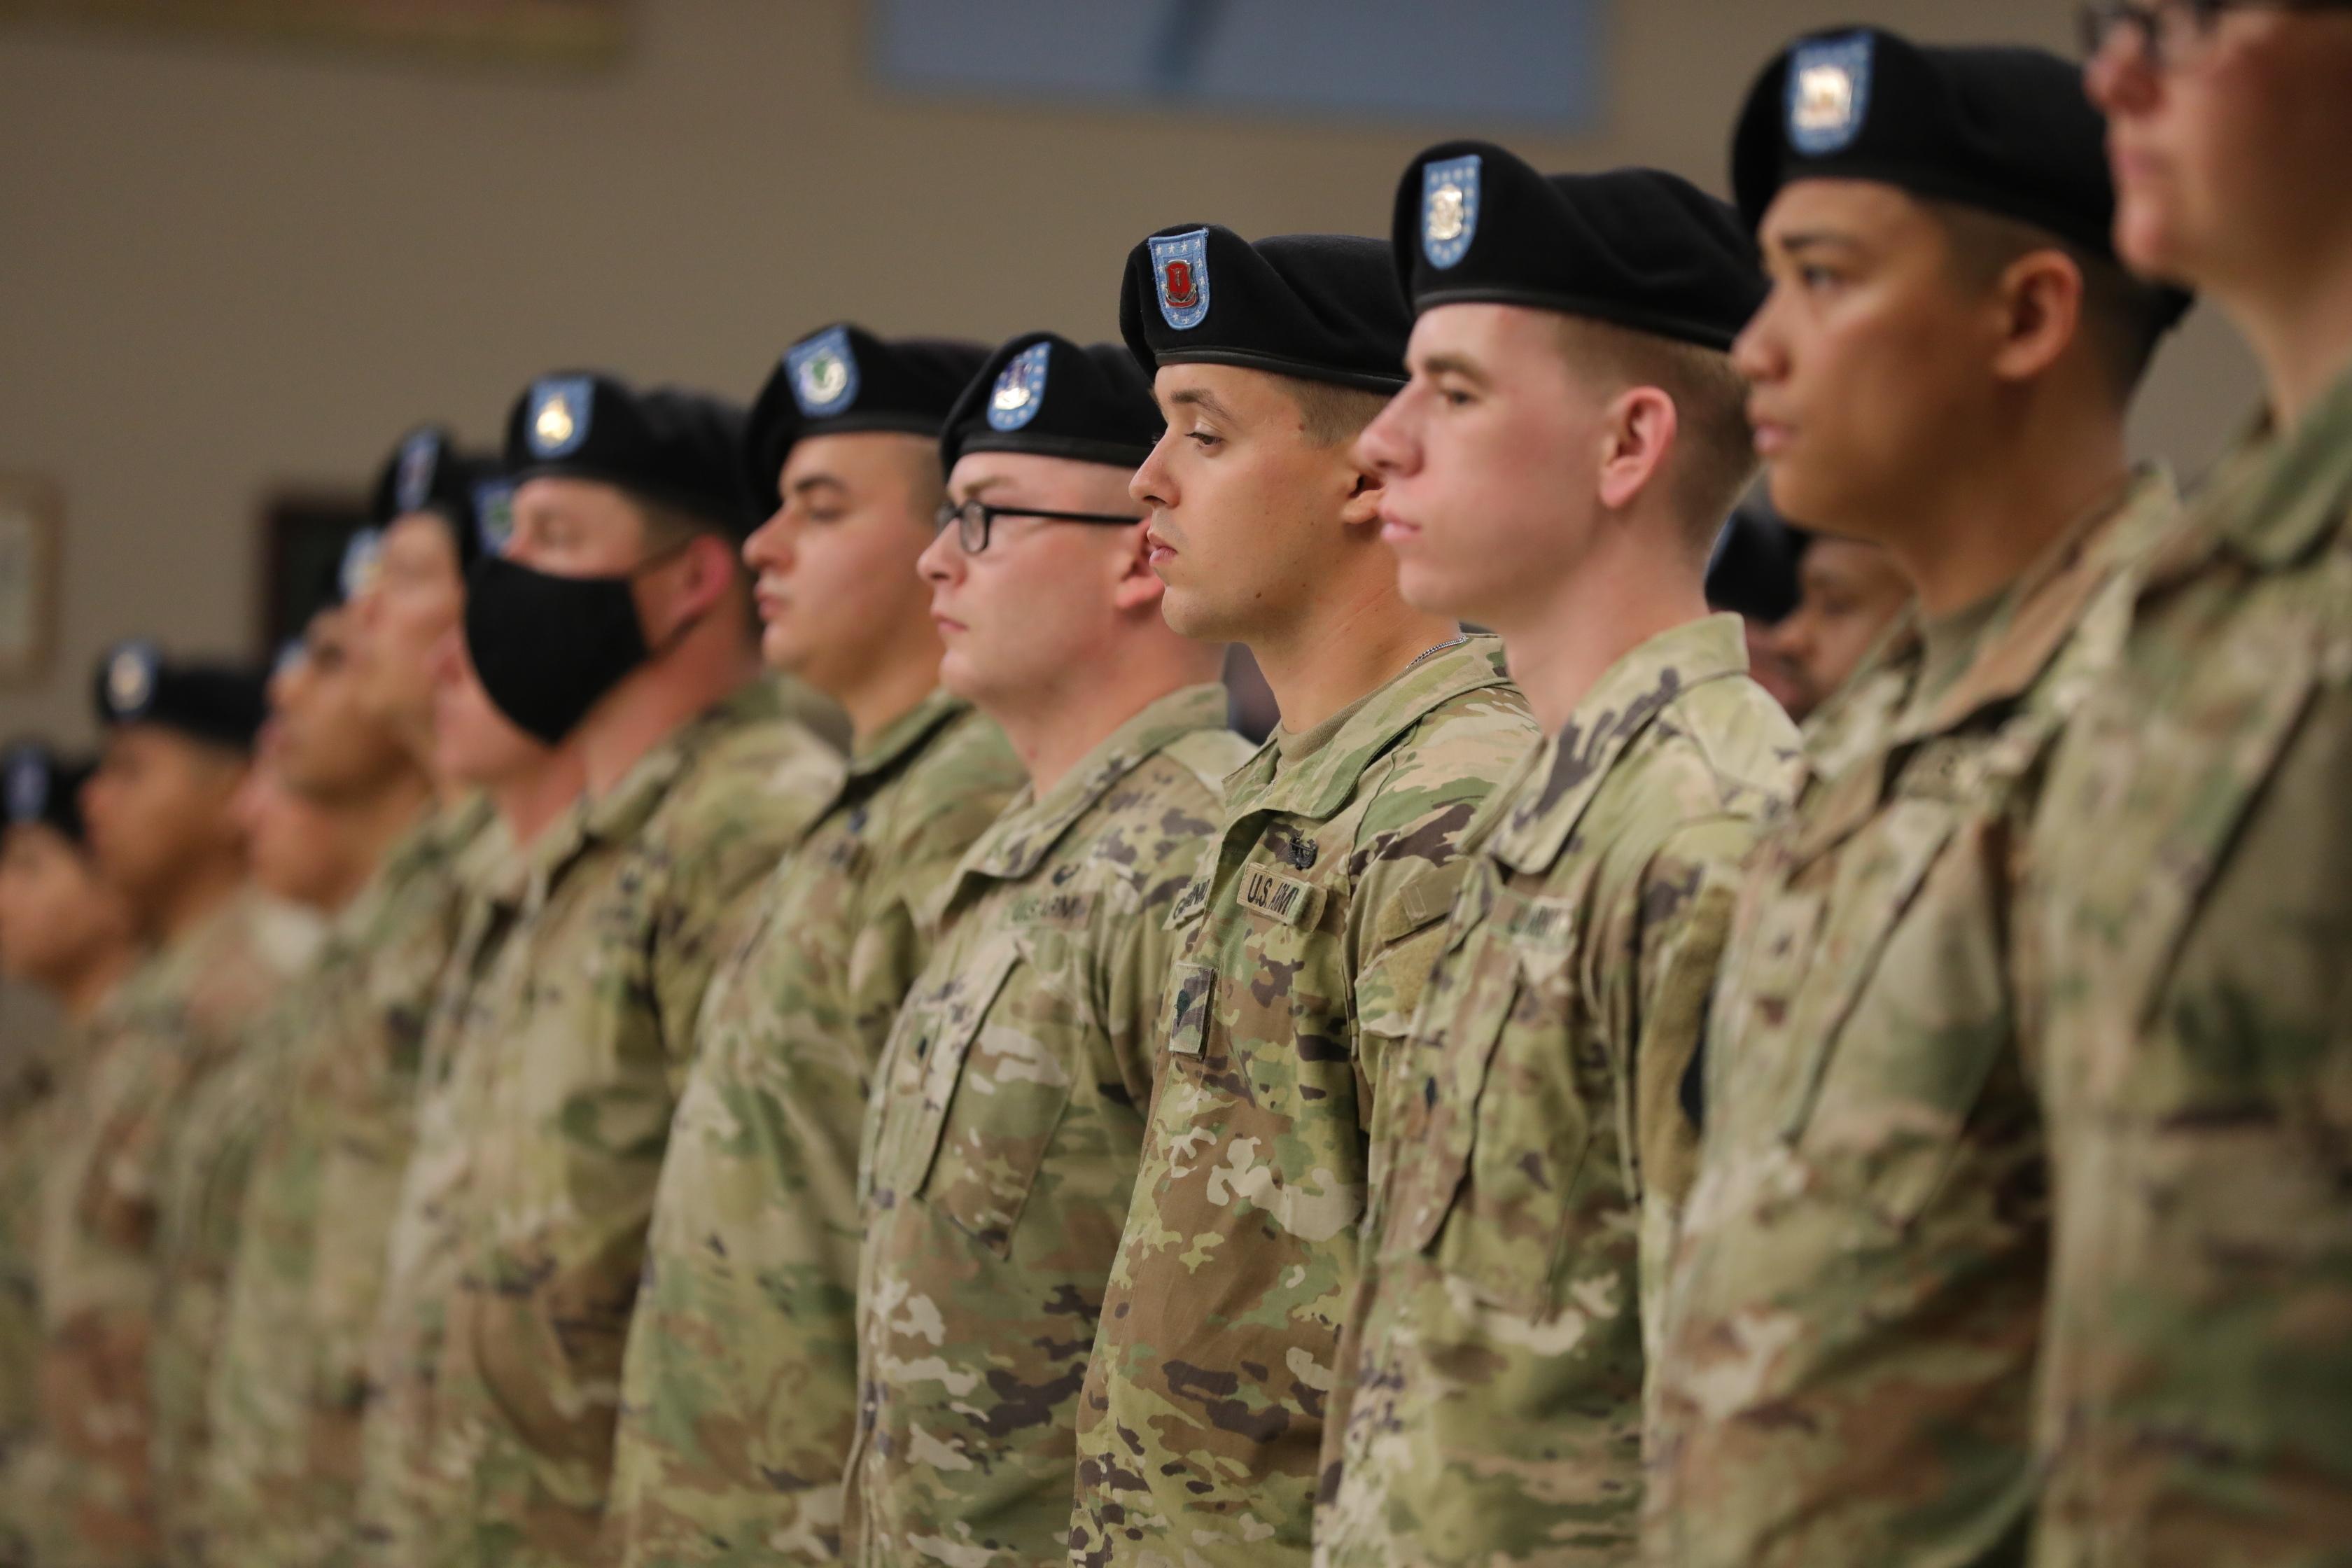 The 101st Airborne Division (Air Assault) and U.S. Army Fort Campbell re-enlists 124 soldiers to continue to serve our country. Stay tuned for more event coverage this week! (Photos by SPC Harris, 101st Division Public Affairs Office)